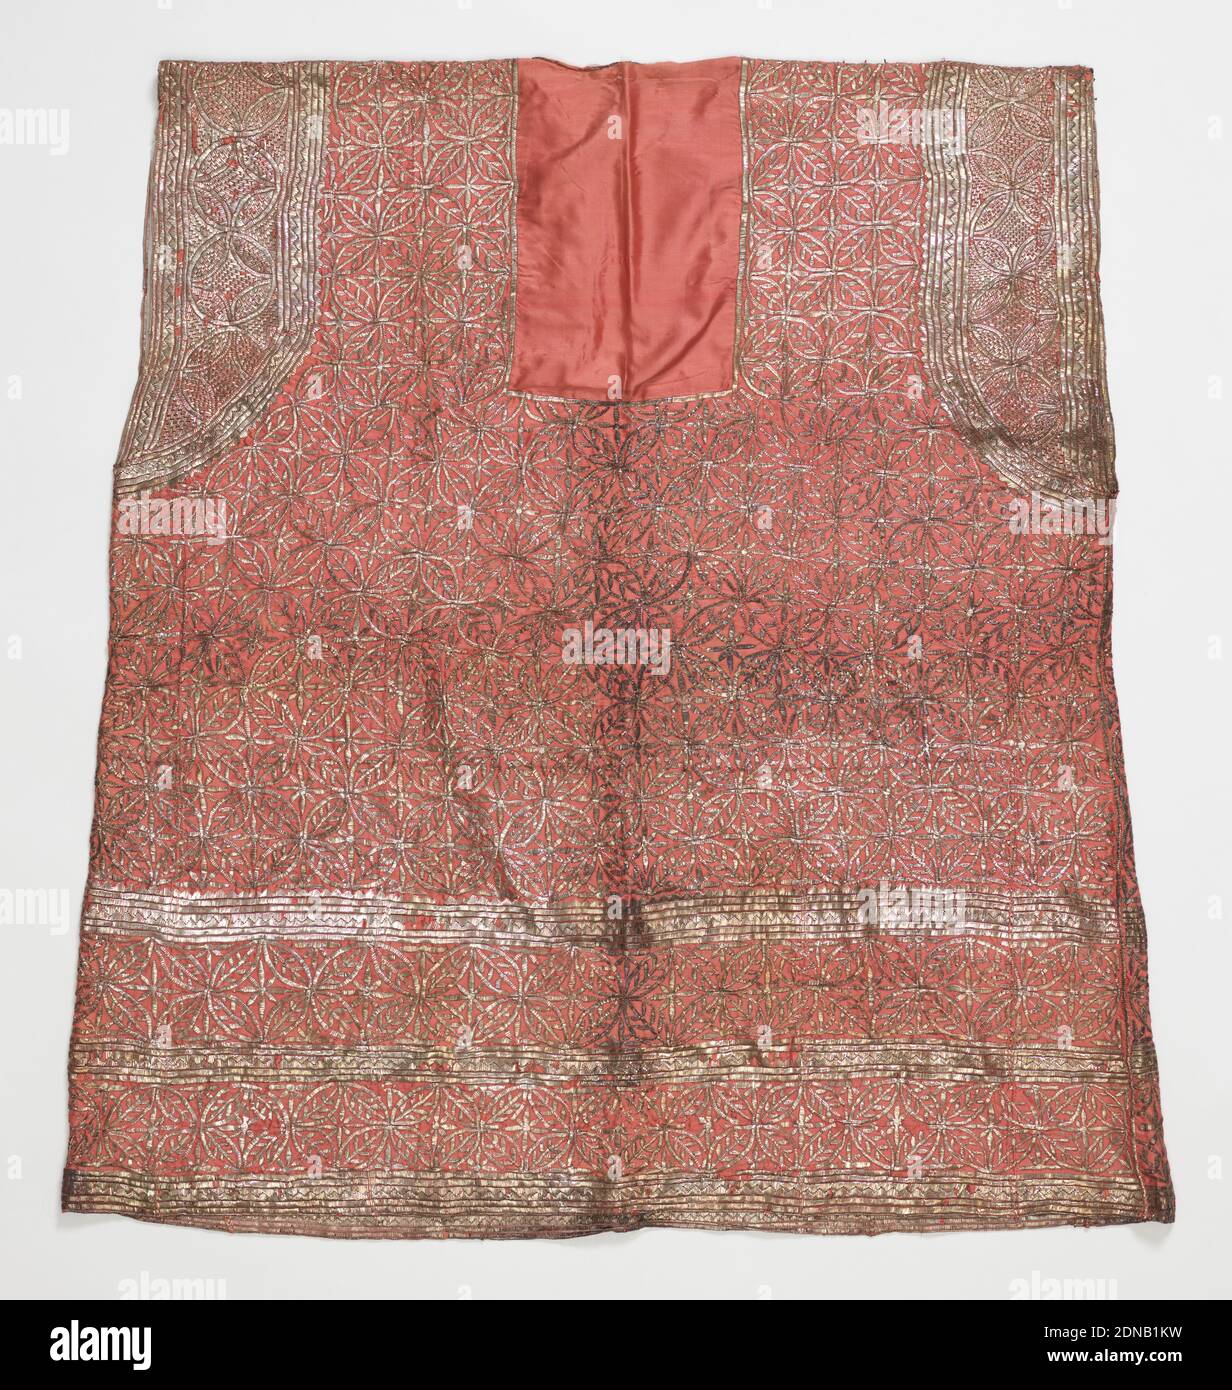 Tunic, Medium: silk, metallic Technique: embroidery on plain weave, Sleeveless tunic of salmon-pink silk embroidered solidly with flat strips of silver foil in a geometric design., Tunisia, 19th century, costume & accessories, Tunic Stock Photo